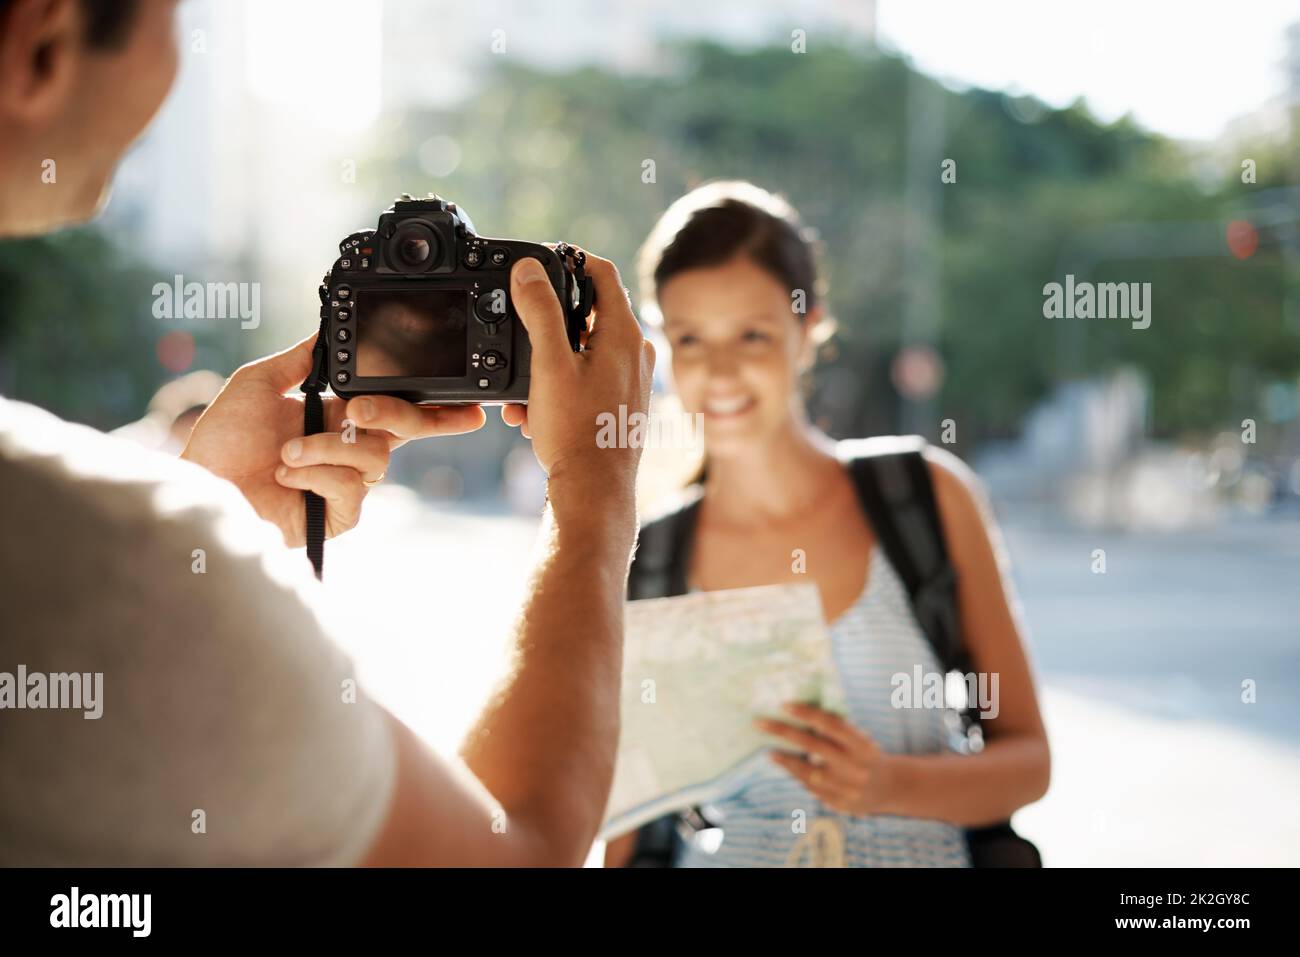 Teasing her with a quick vacation picture. a man taking a photo of his girlfriend while theyre touring a foreign city. Stock Photo